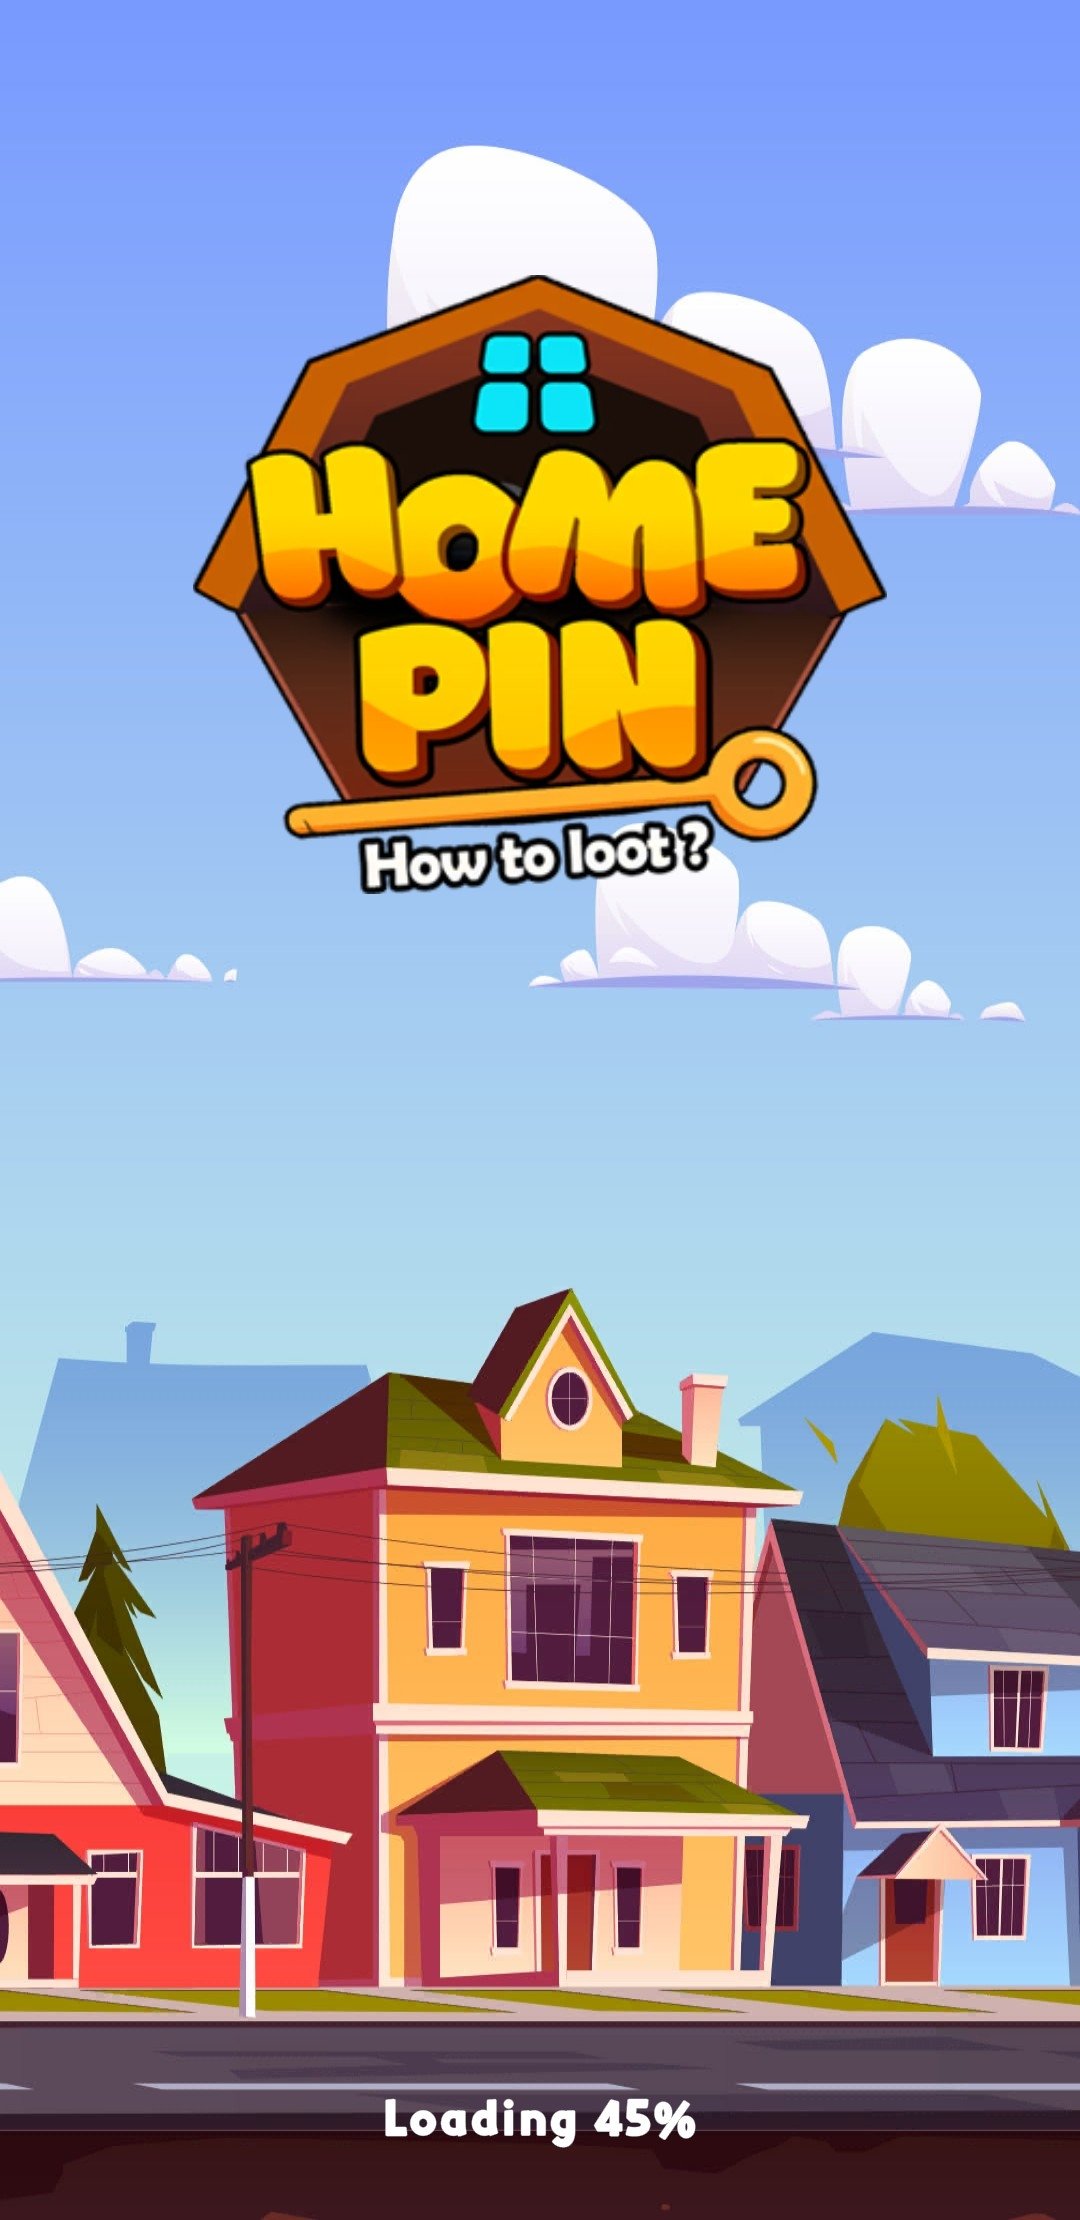 Home Pin 20.20.20   Download for Android APK Free